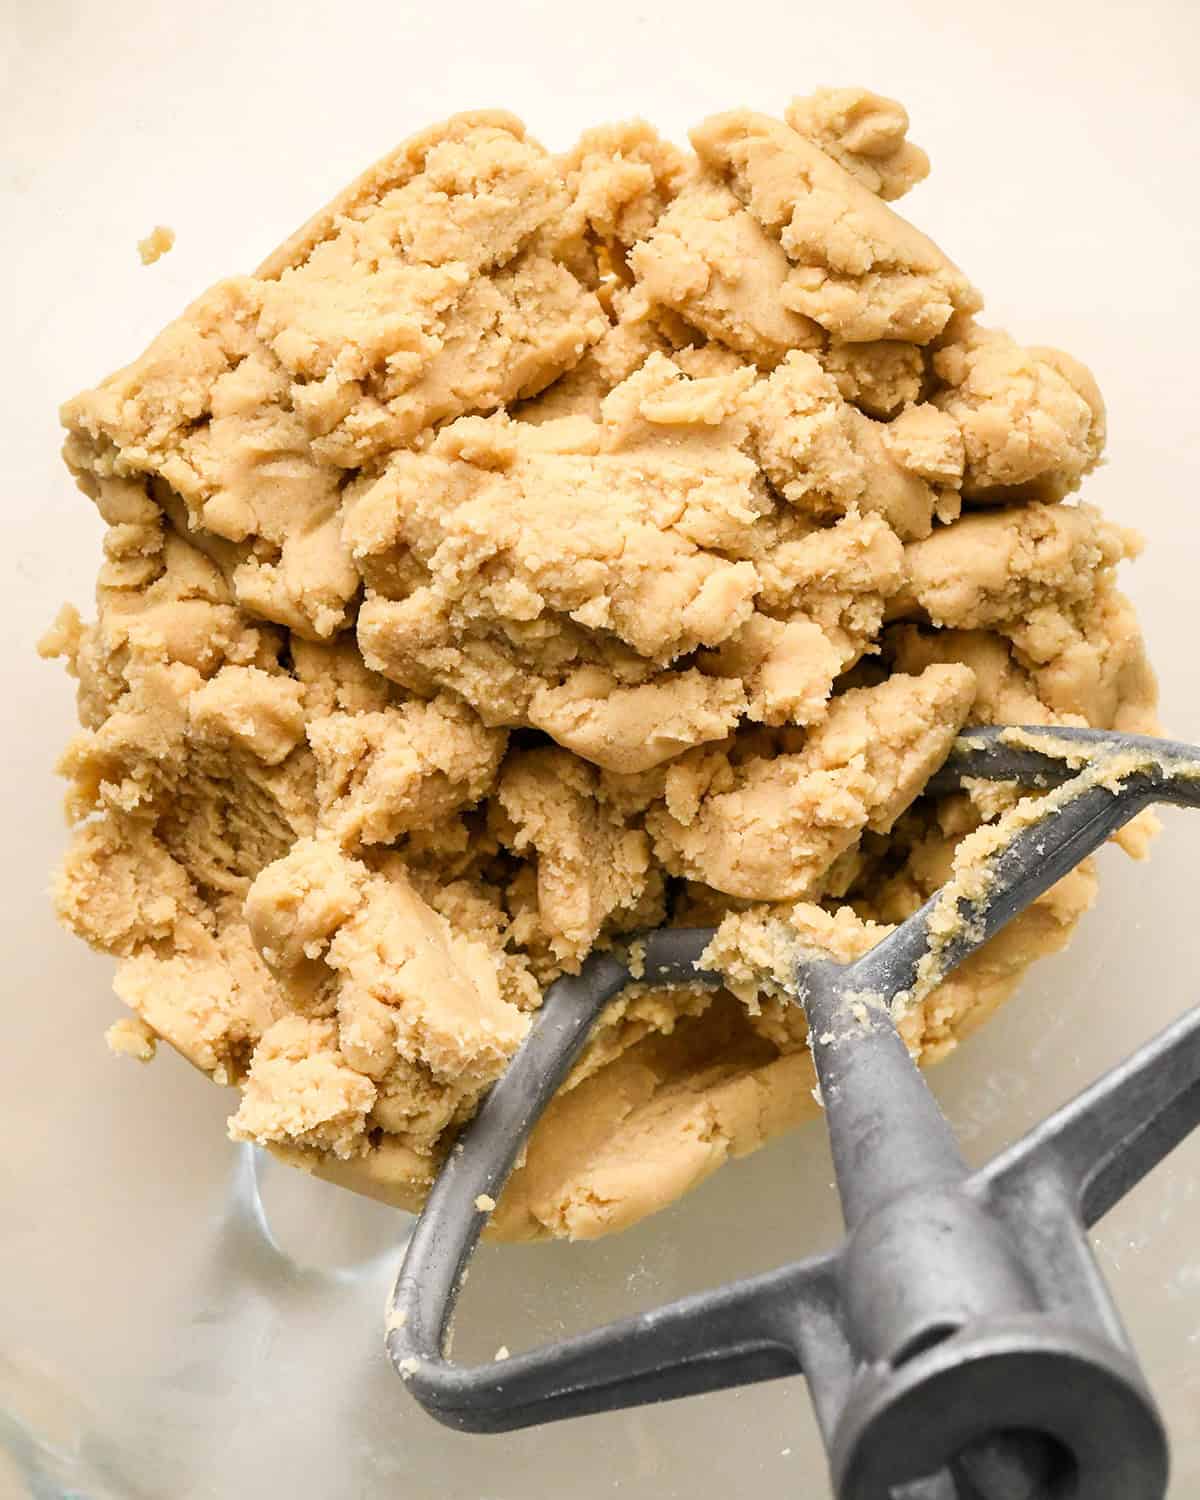 How to Make Edible Cookie Dough  - dough after dry ingredients have been beaten in